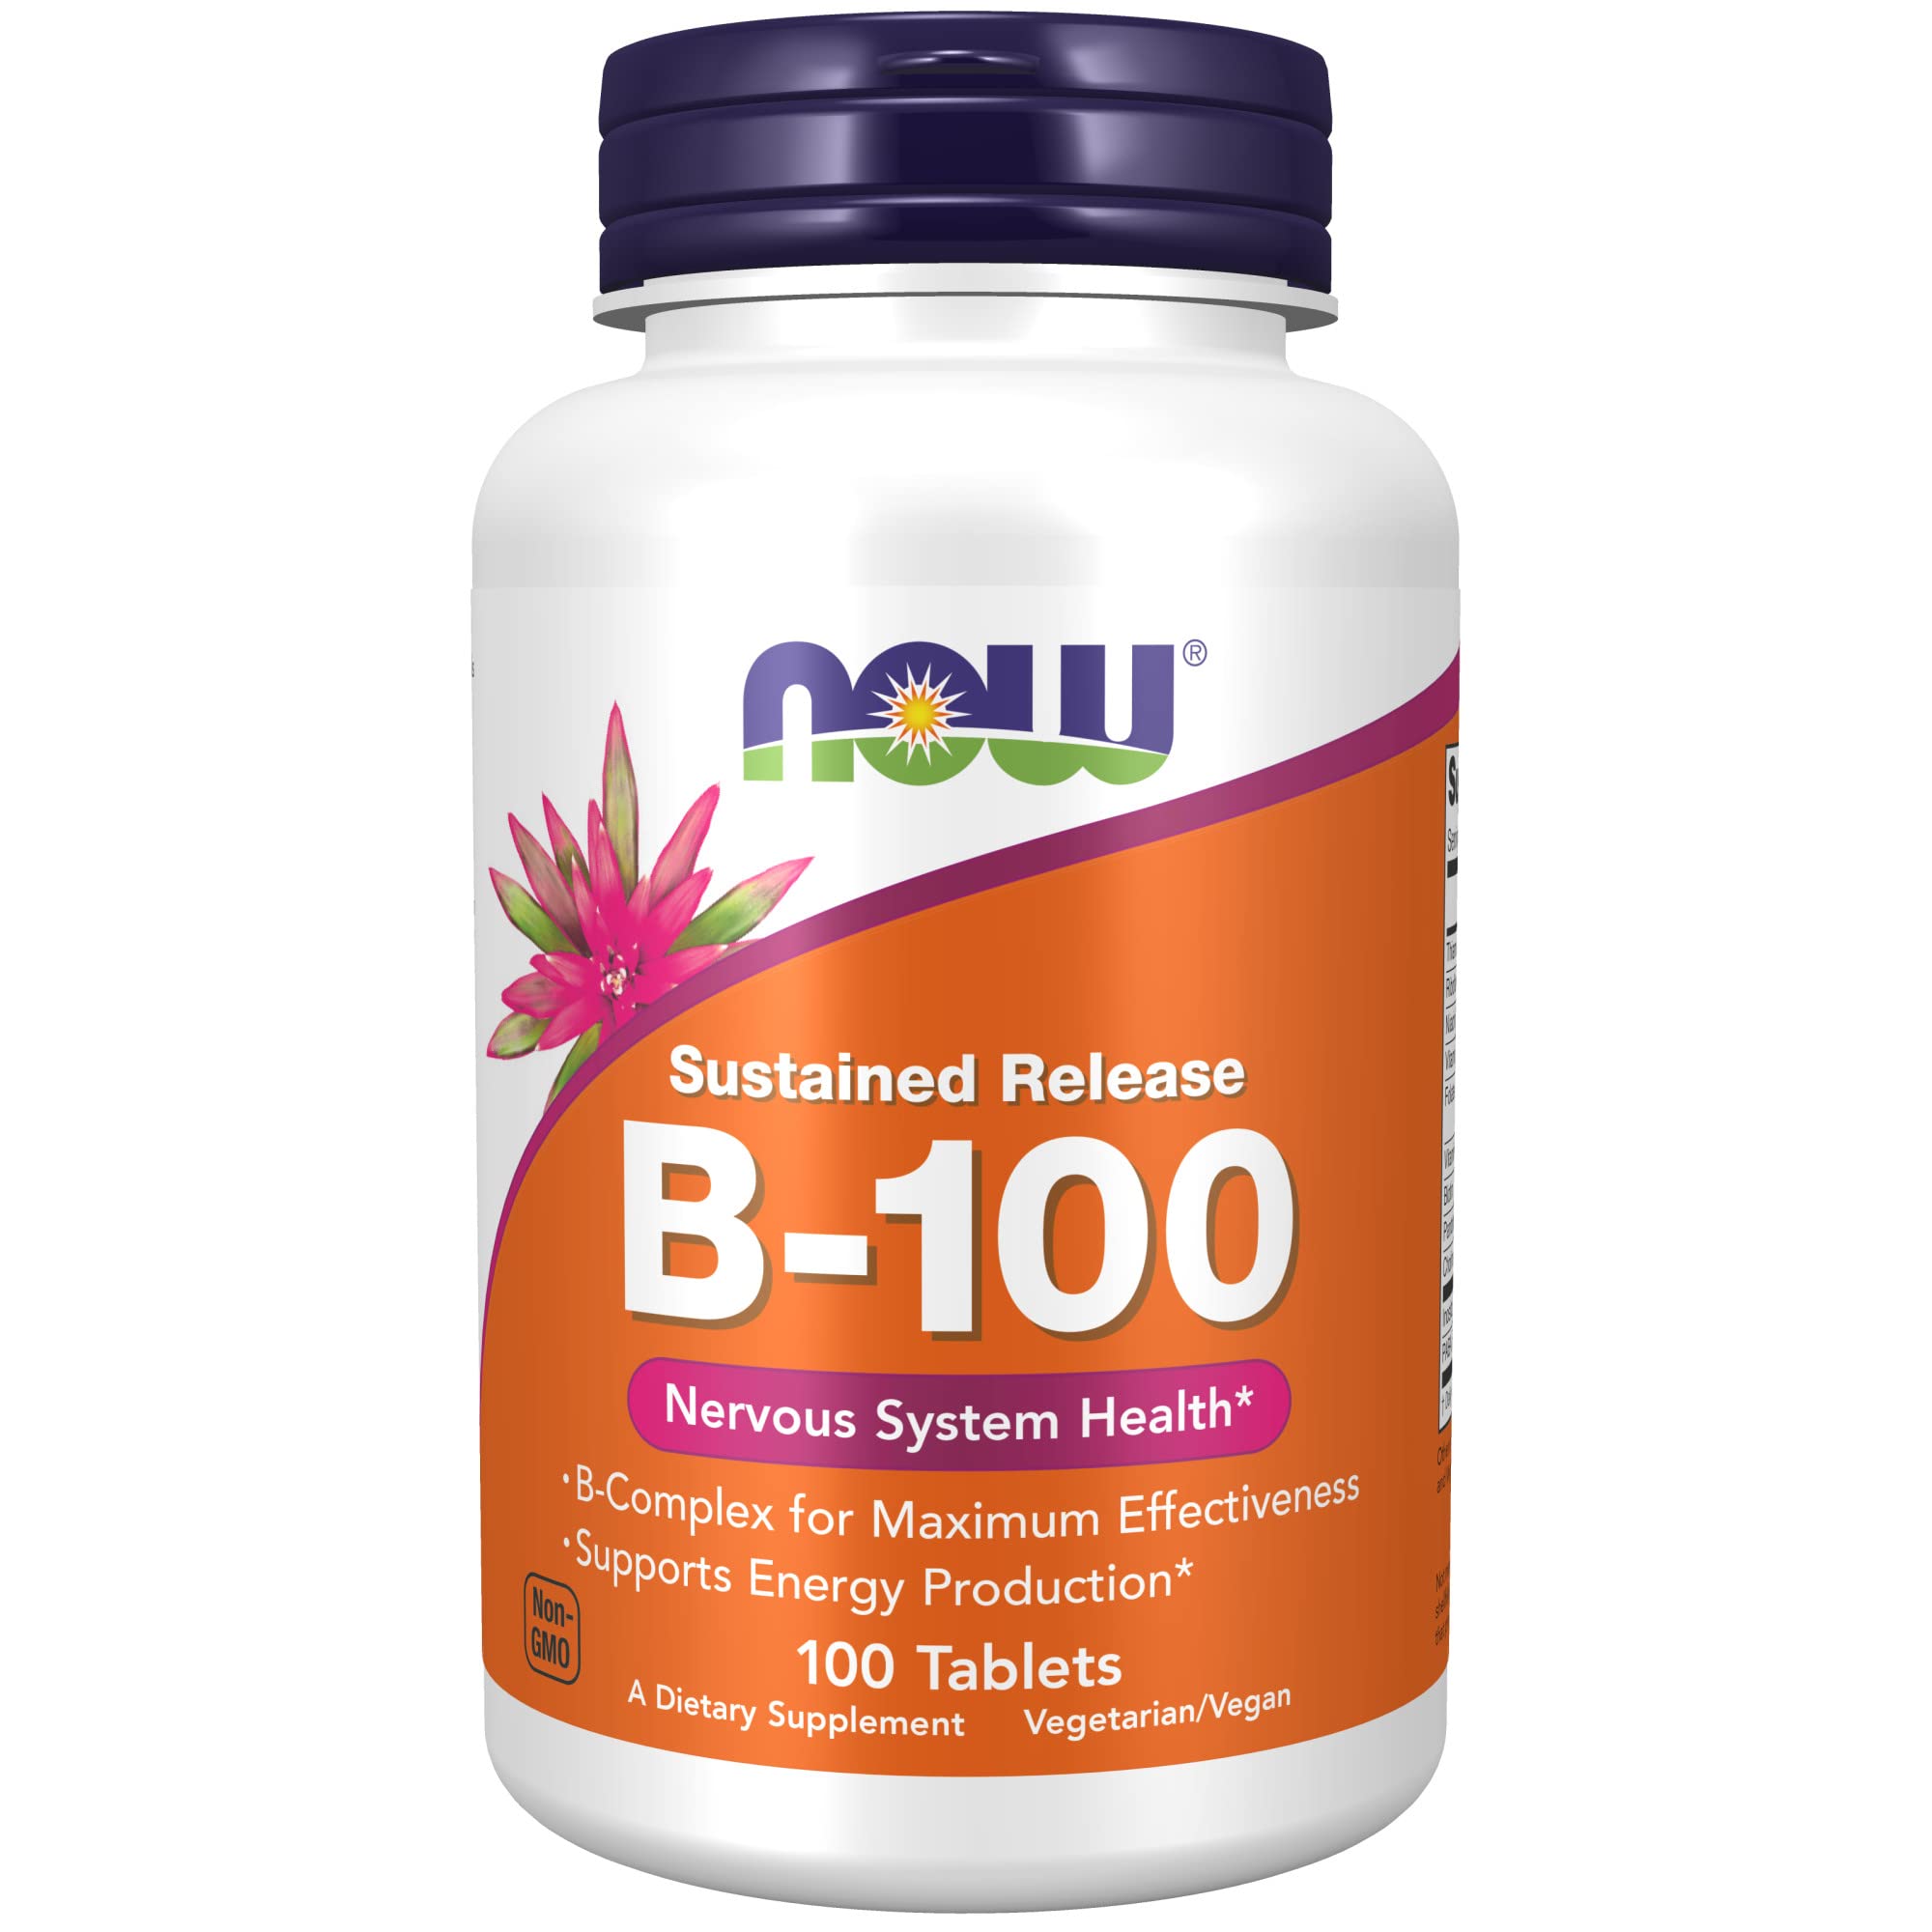 Book Cover NOW Supplements, Vitamin B-100, Sustained Release, Energy Production*, Nervous System Health*, 100 Tablets 100 Count (Pack of 1)